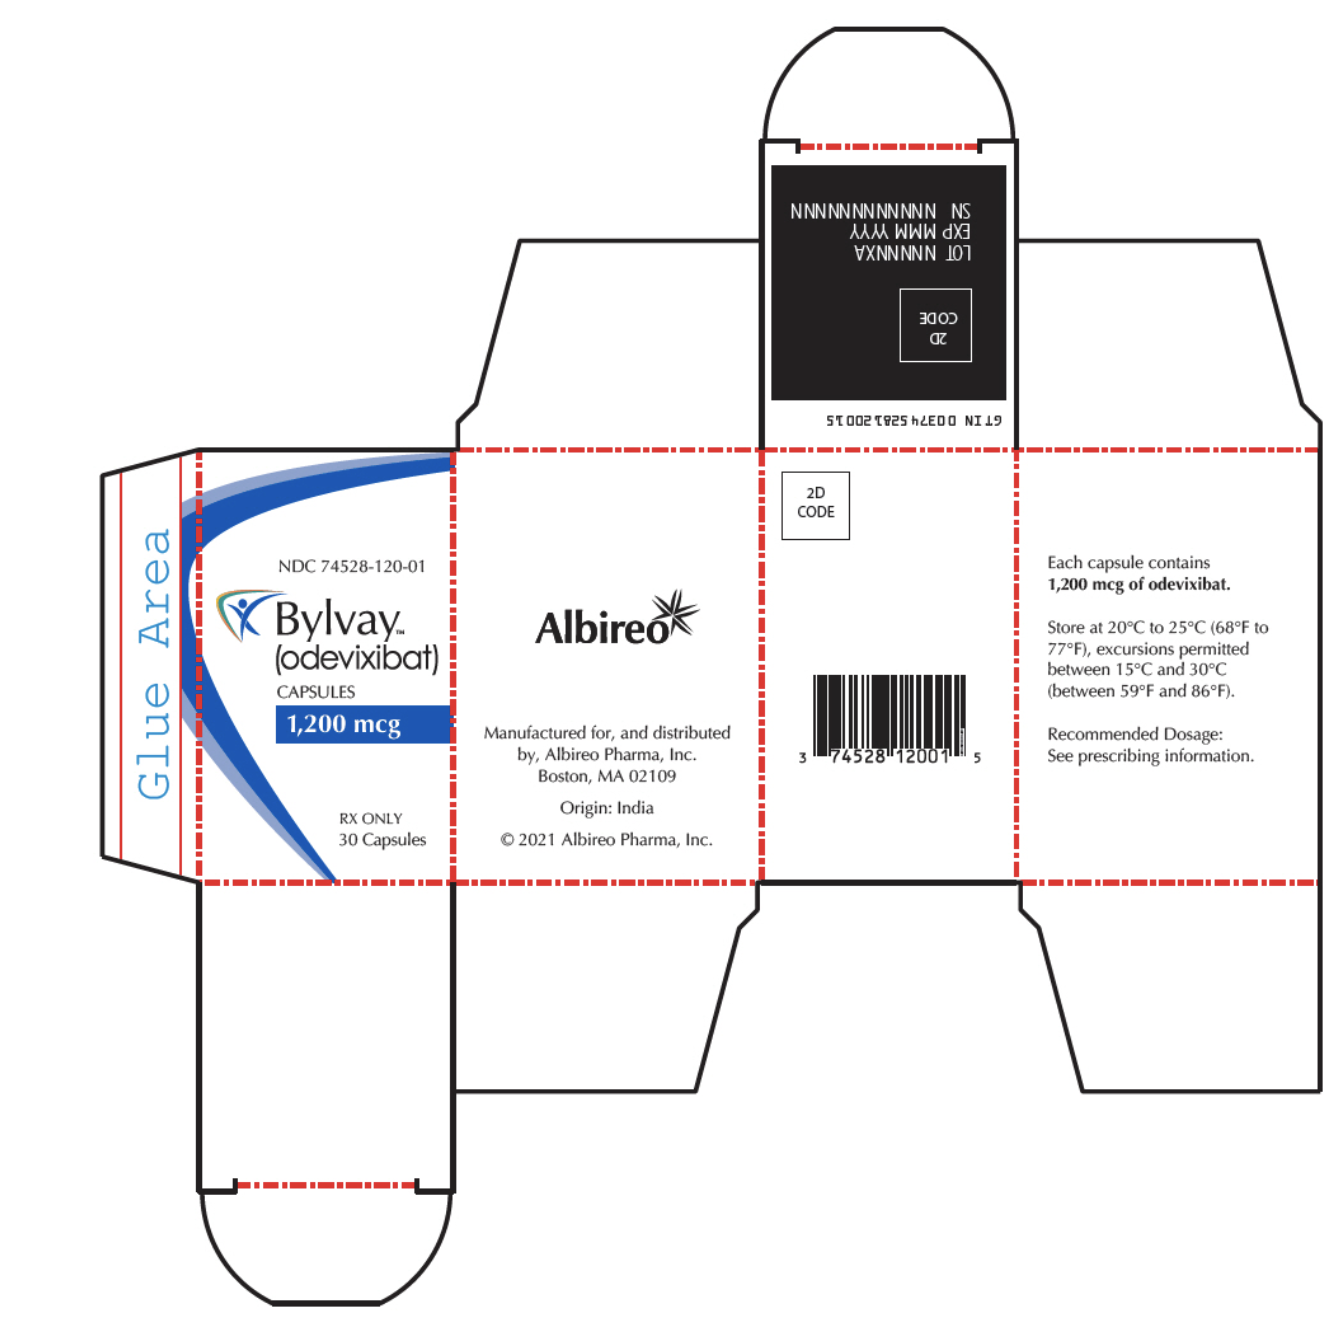 File:Odevixibat Package Label (1200 mcg).png